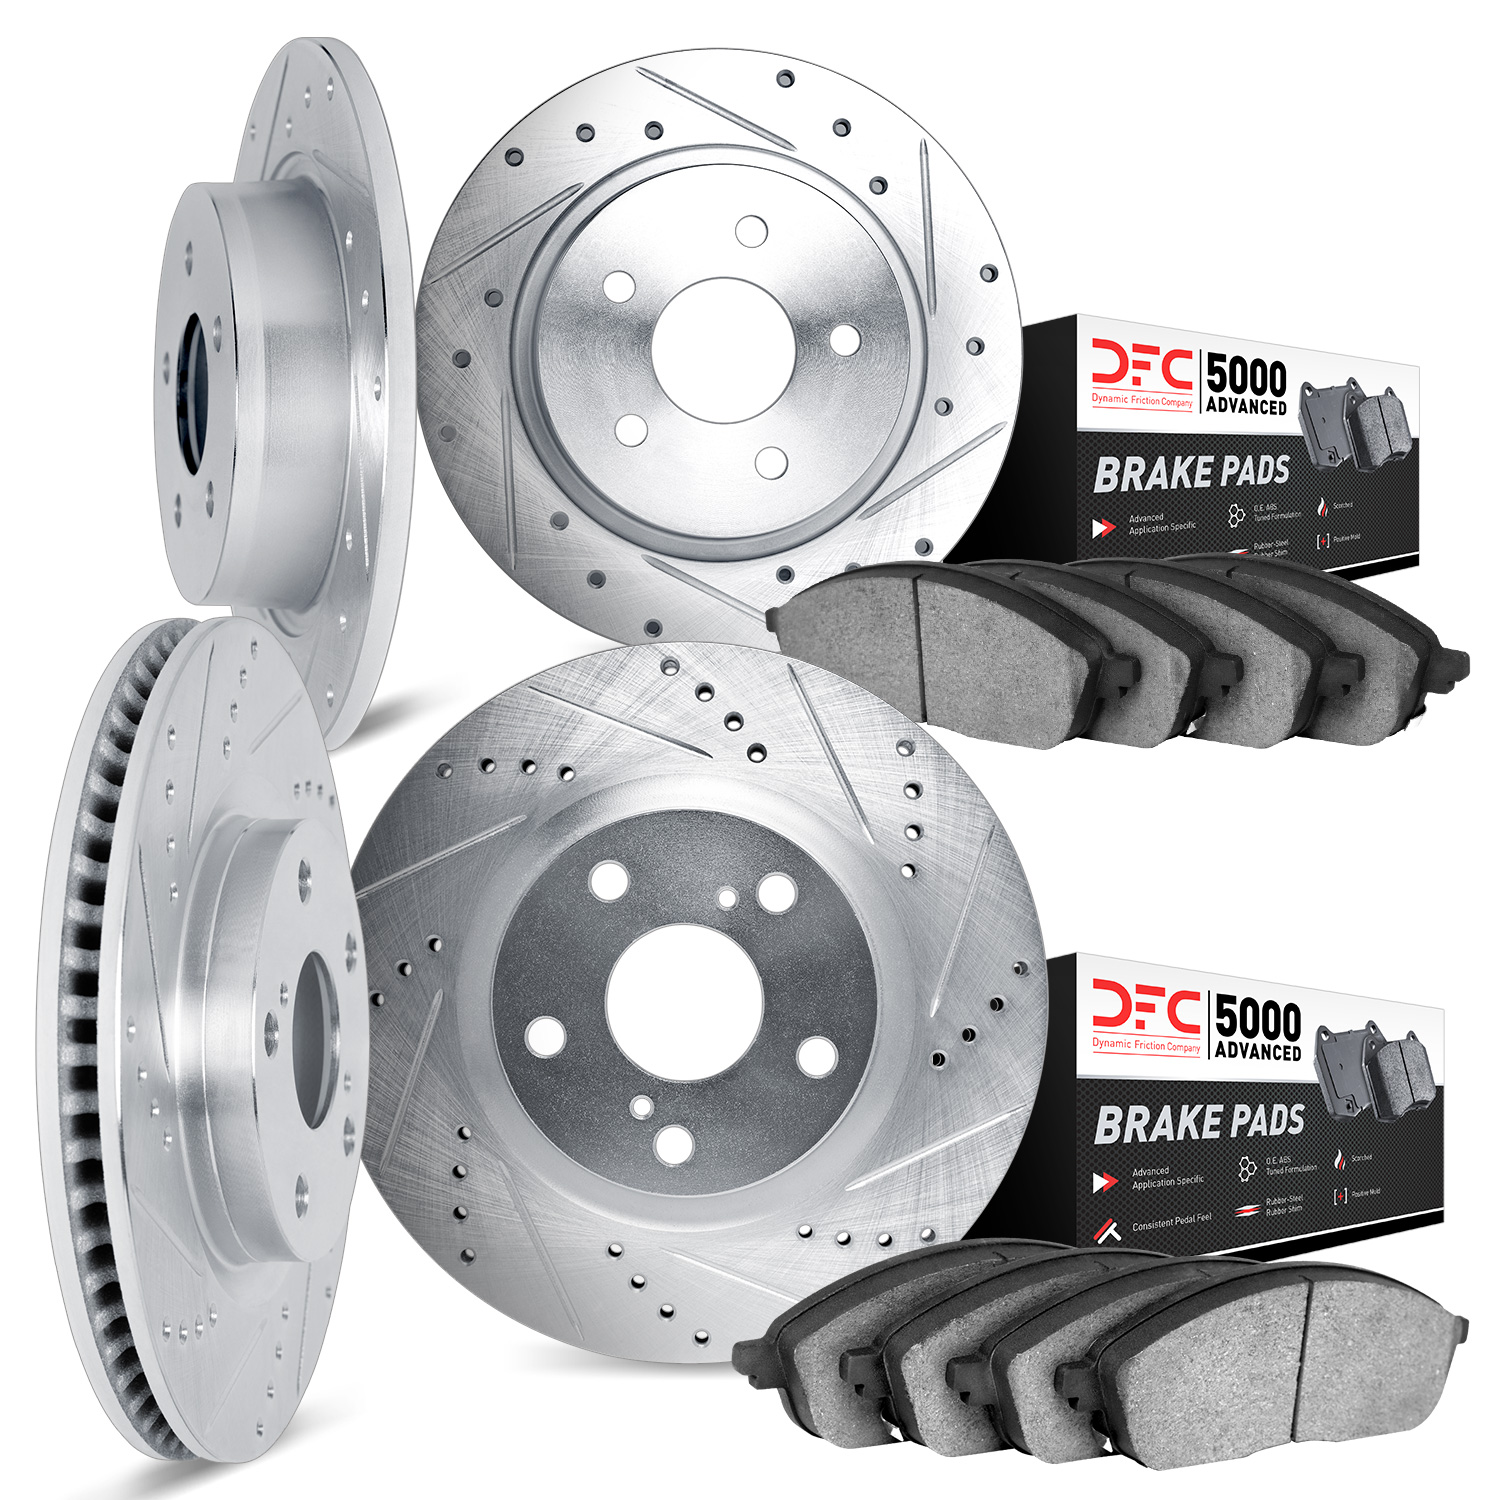 7504-76151 Drilled/Slotted Brake Rotors w/5000 Advanced Brake Pads Kit [Silver], 2002-2003 Lexus/Toyota/Scion, Position: Front a